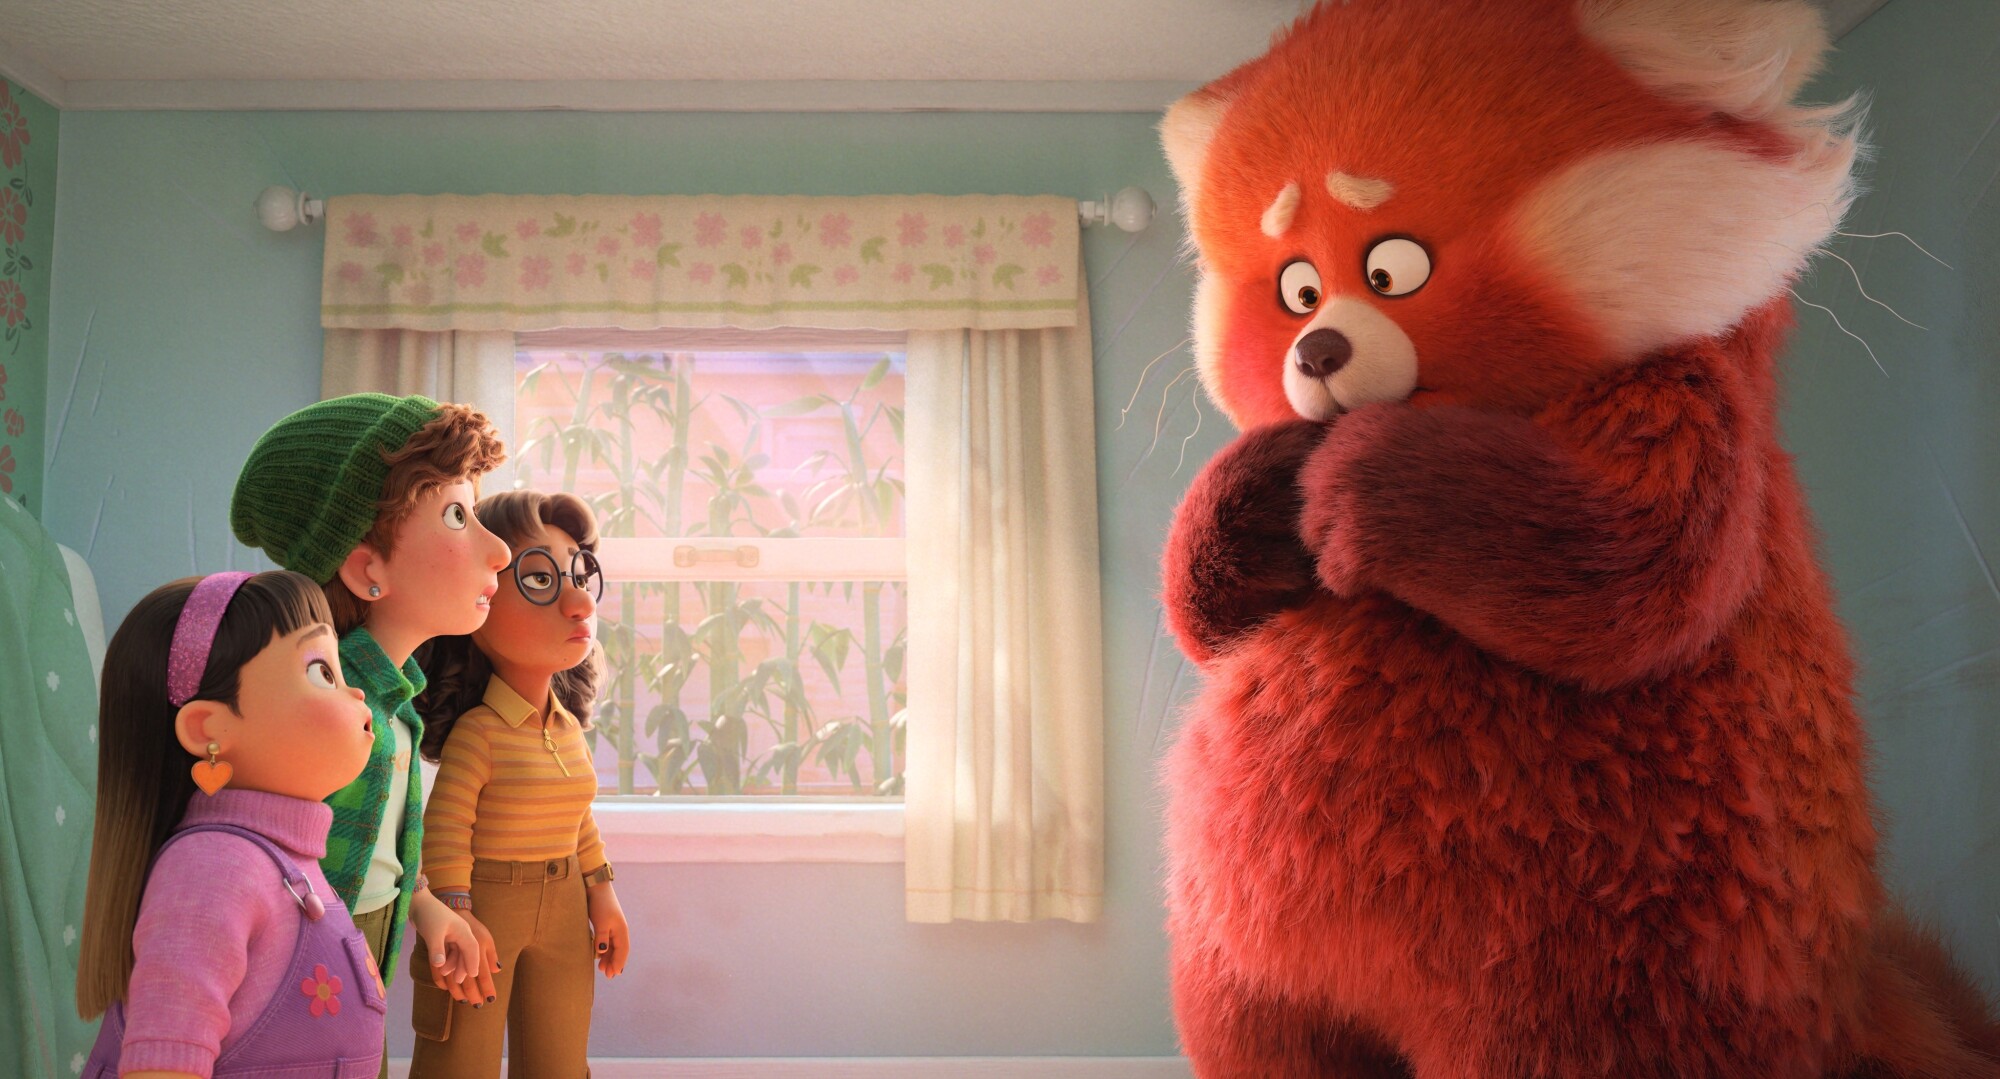 In Pixar's new "Turning Red," the teenaged heroine turns into a giant red panda when she gets stressed.